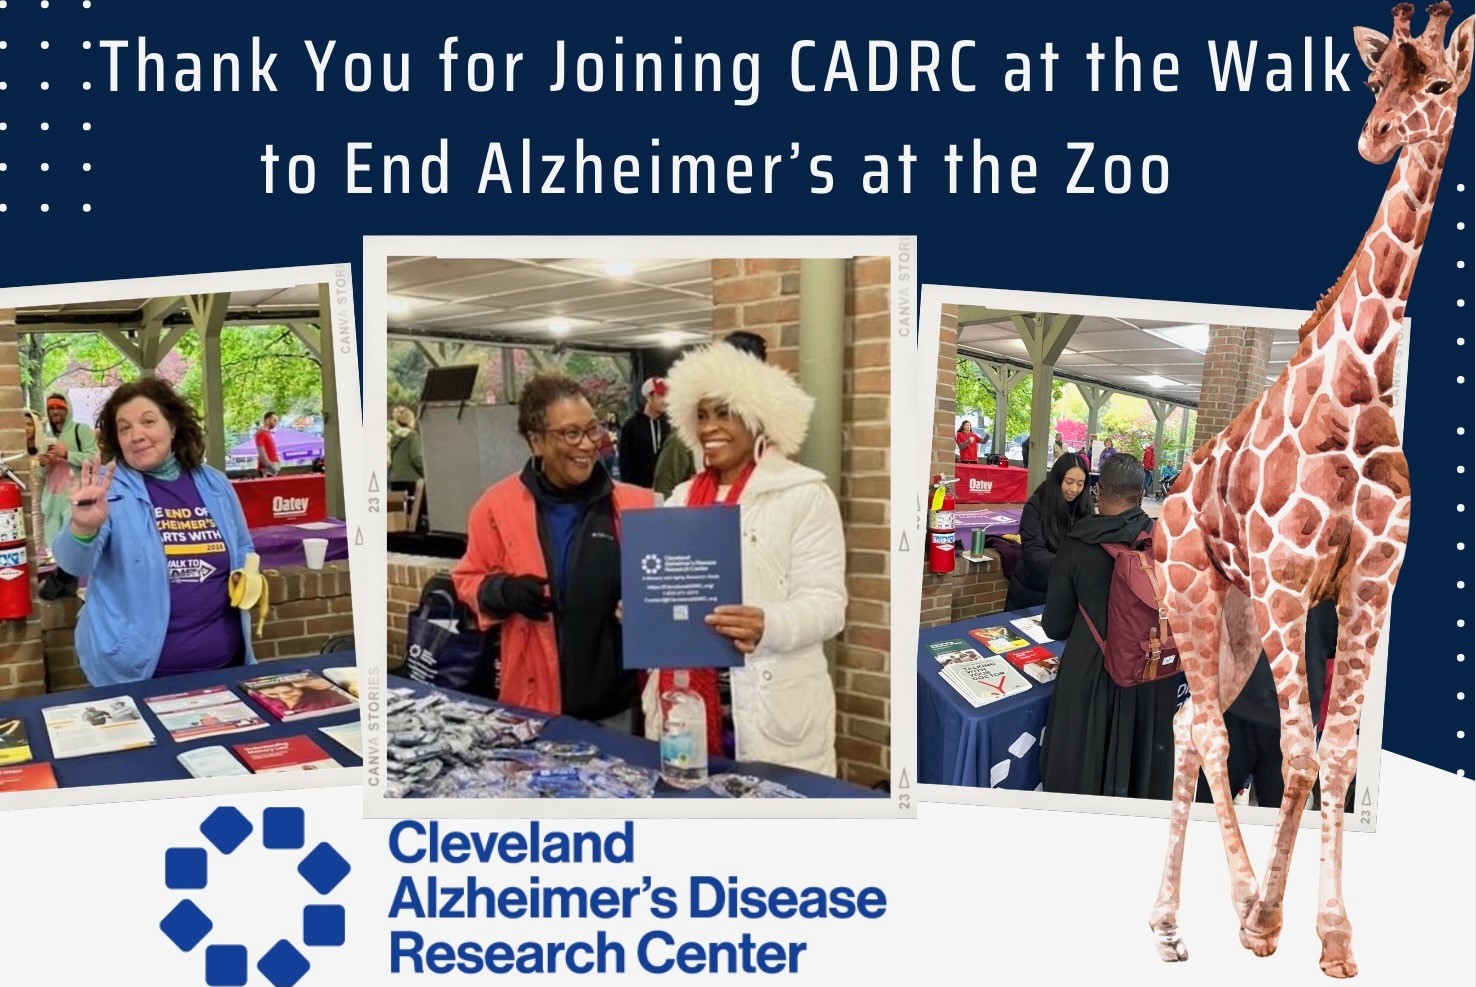 Thank you for joining the CADRC at the Cleveland Alzheimer's Association Walk to End Alzheimer's